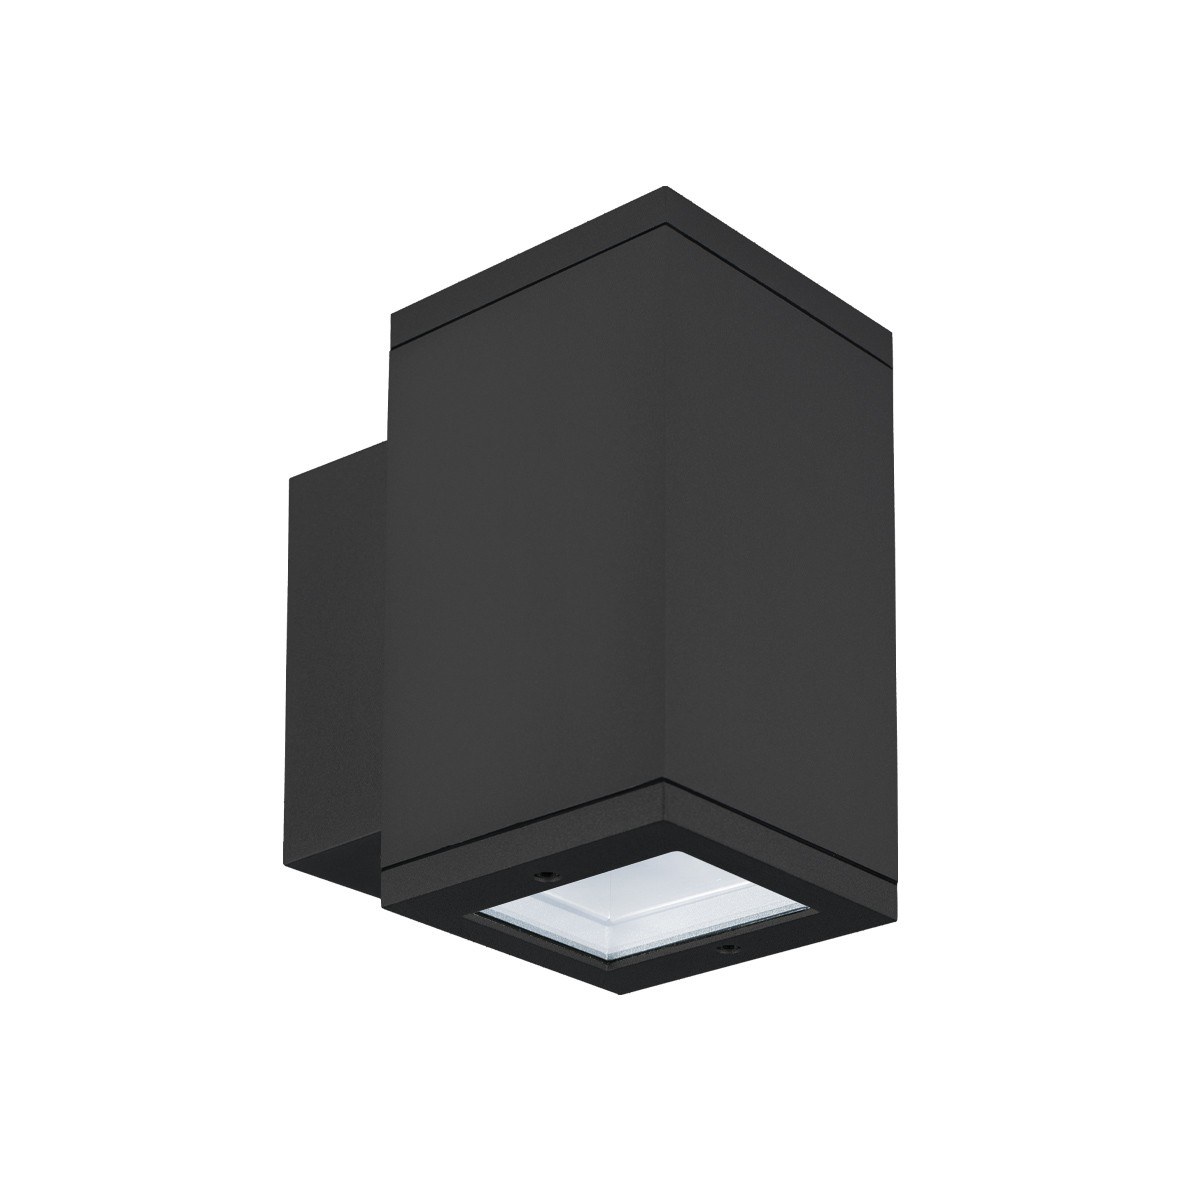 AVERY – LED WALL LAMPLED SQUARED 15,6W 4K AN